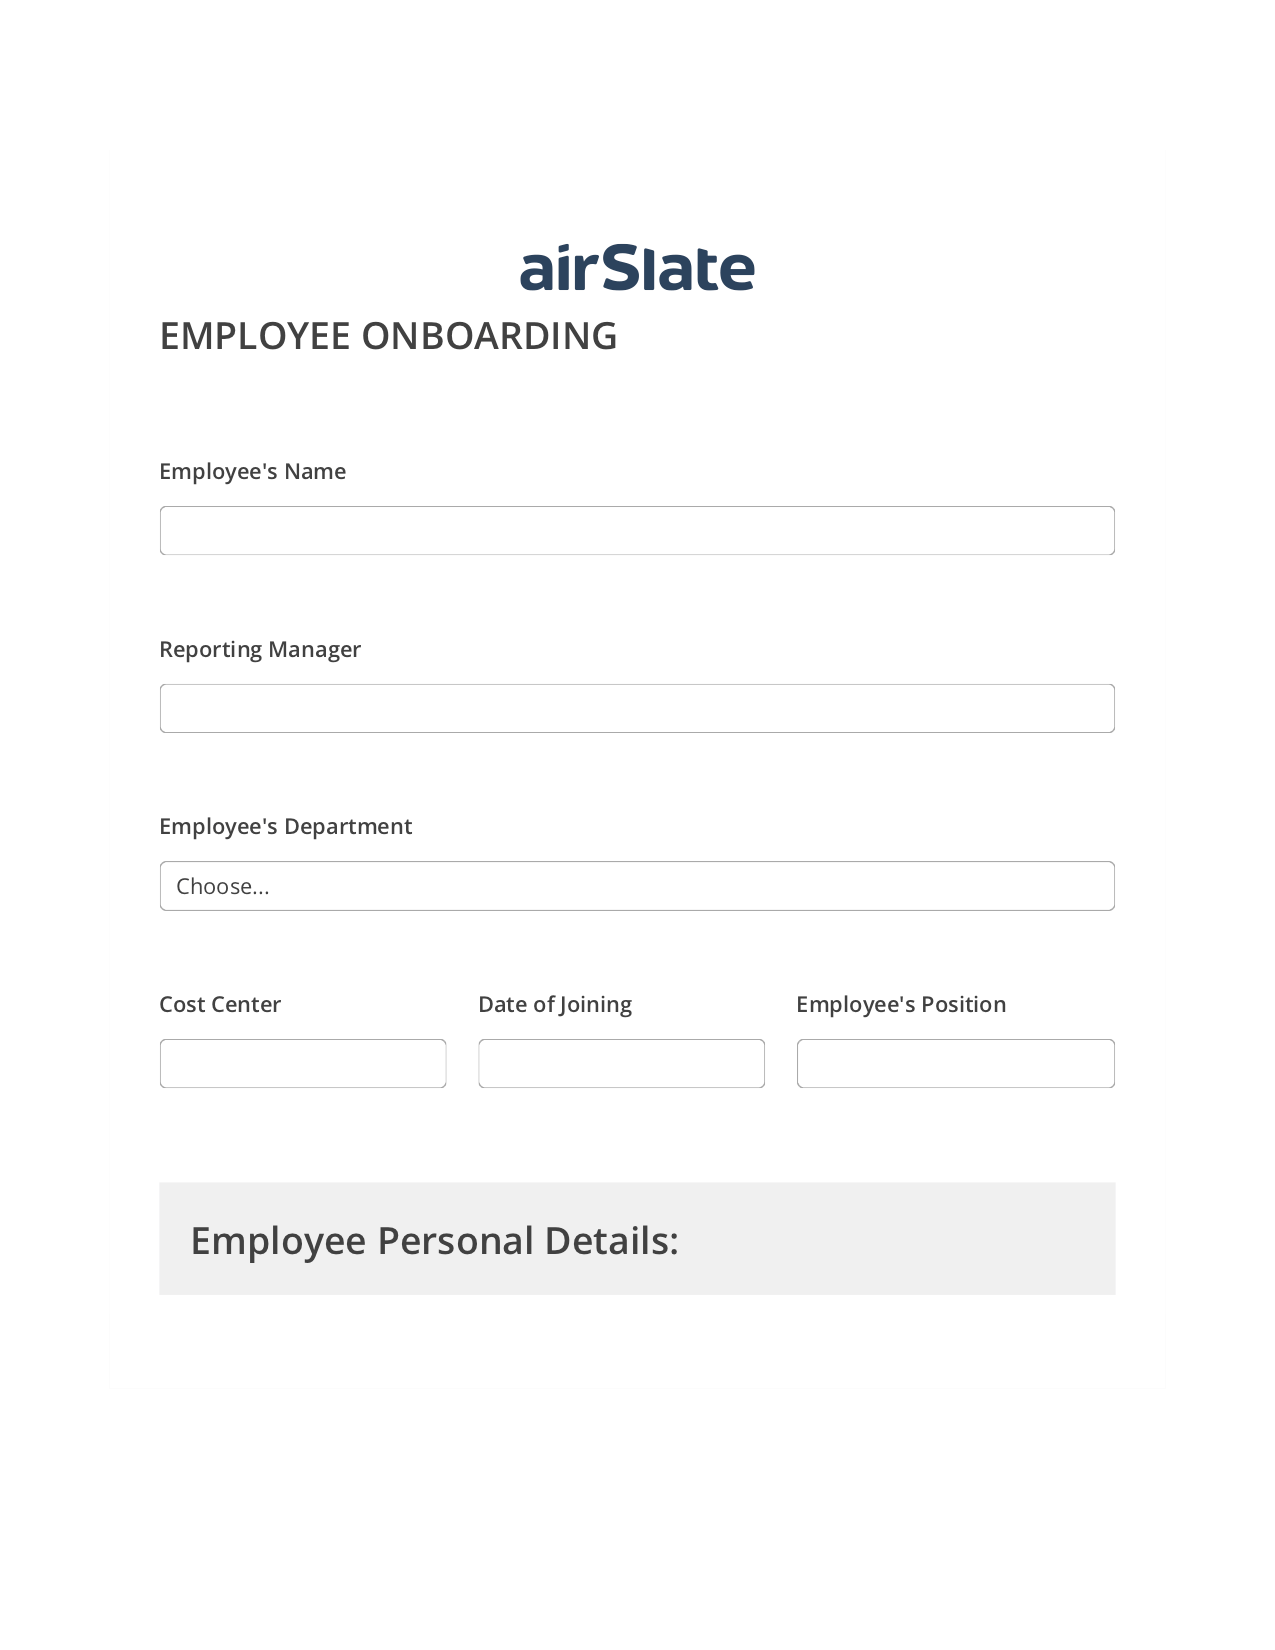 Employee Onboarding Workflow Pre-fill from CSV File Dropdown Options Bot, SendGrid send Campaign bot, Email Notification Postfinish Bot